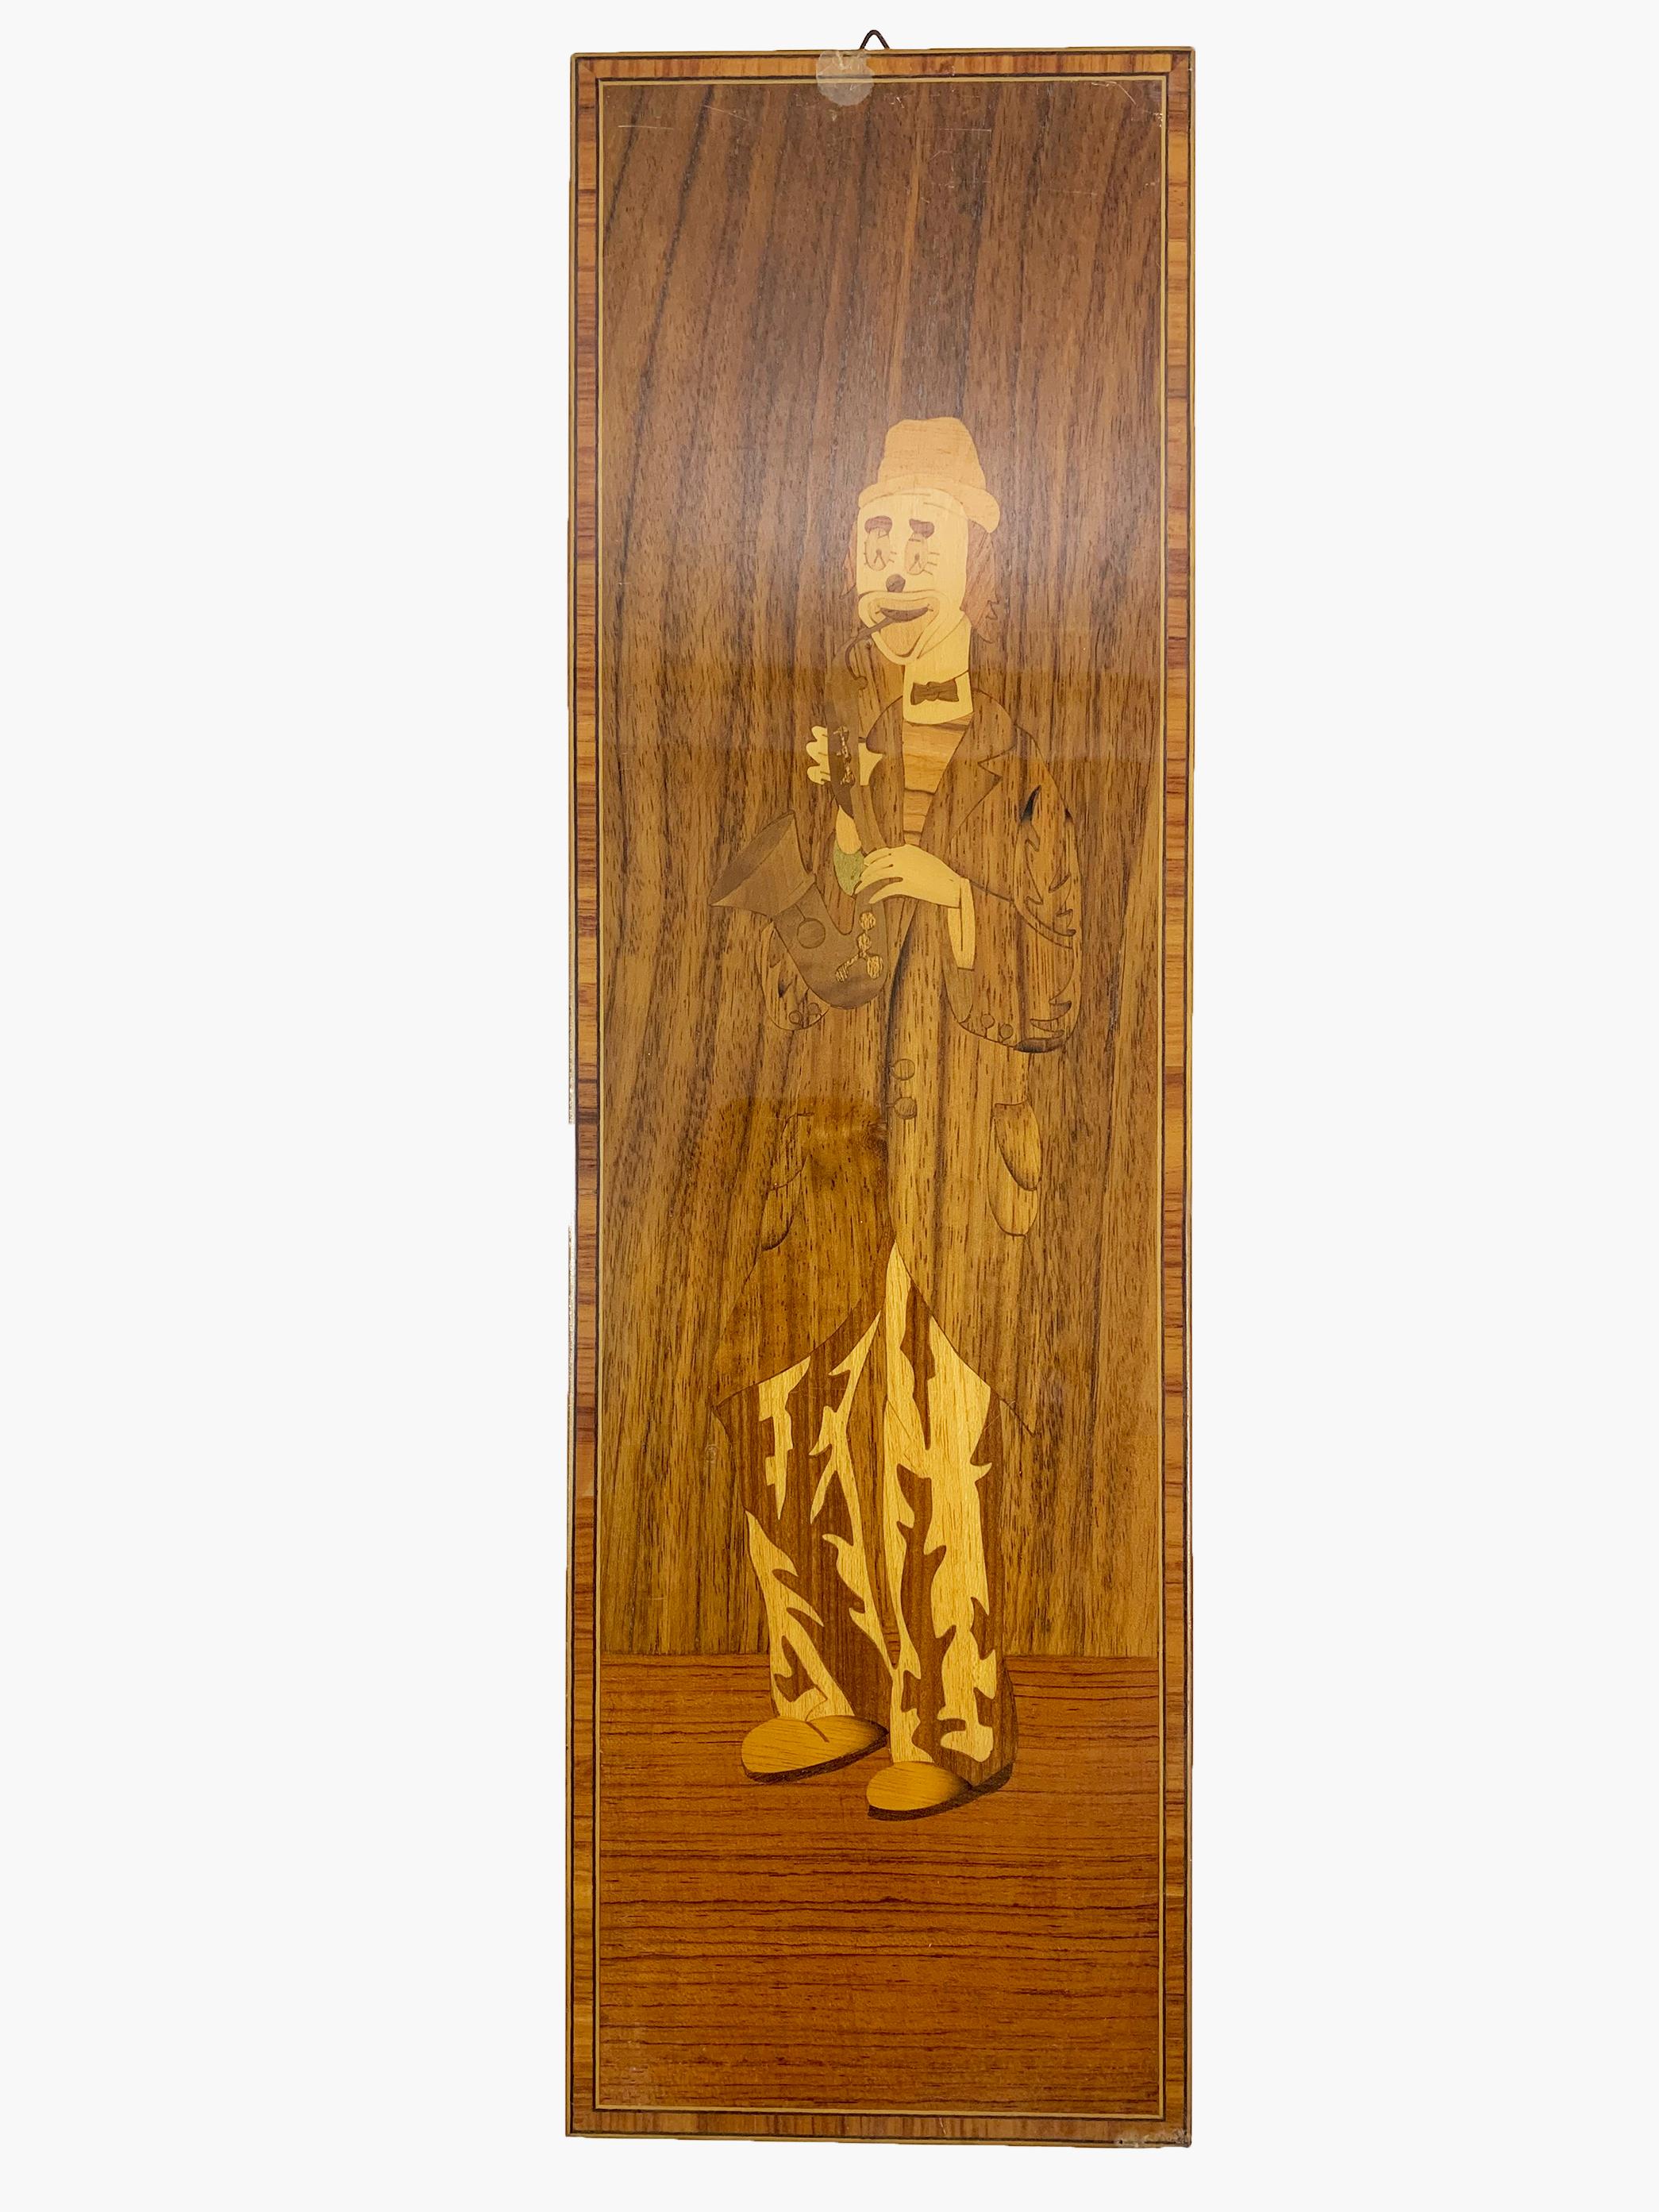 The set of three wood inlay panels intricately depicts a trio of musician clowns, each masterfully crafted with precision and artistry.

The first panel captures the essence of musical whimsy with a clown playing the saxophone, his posture animated